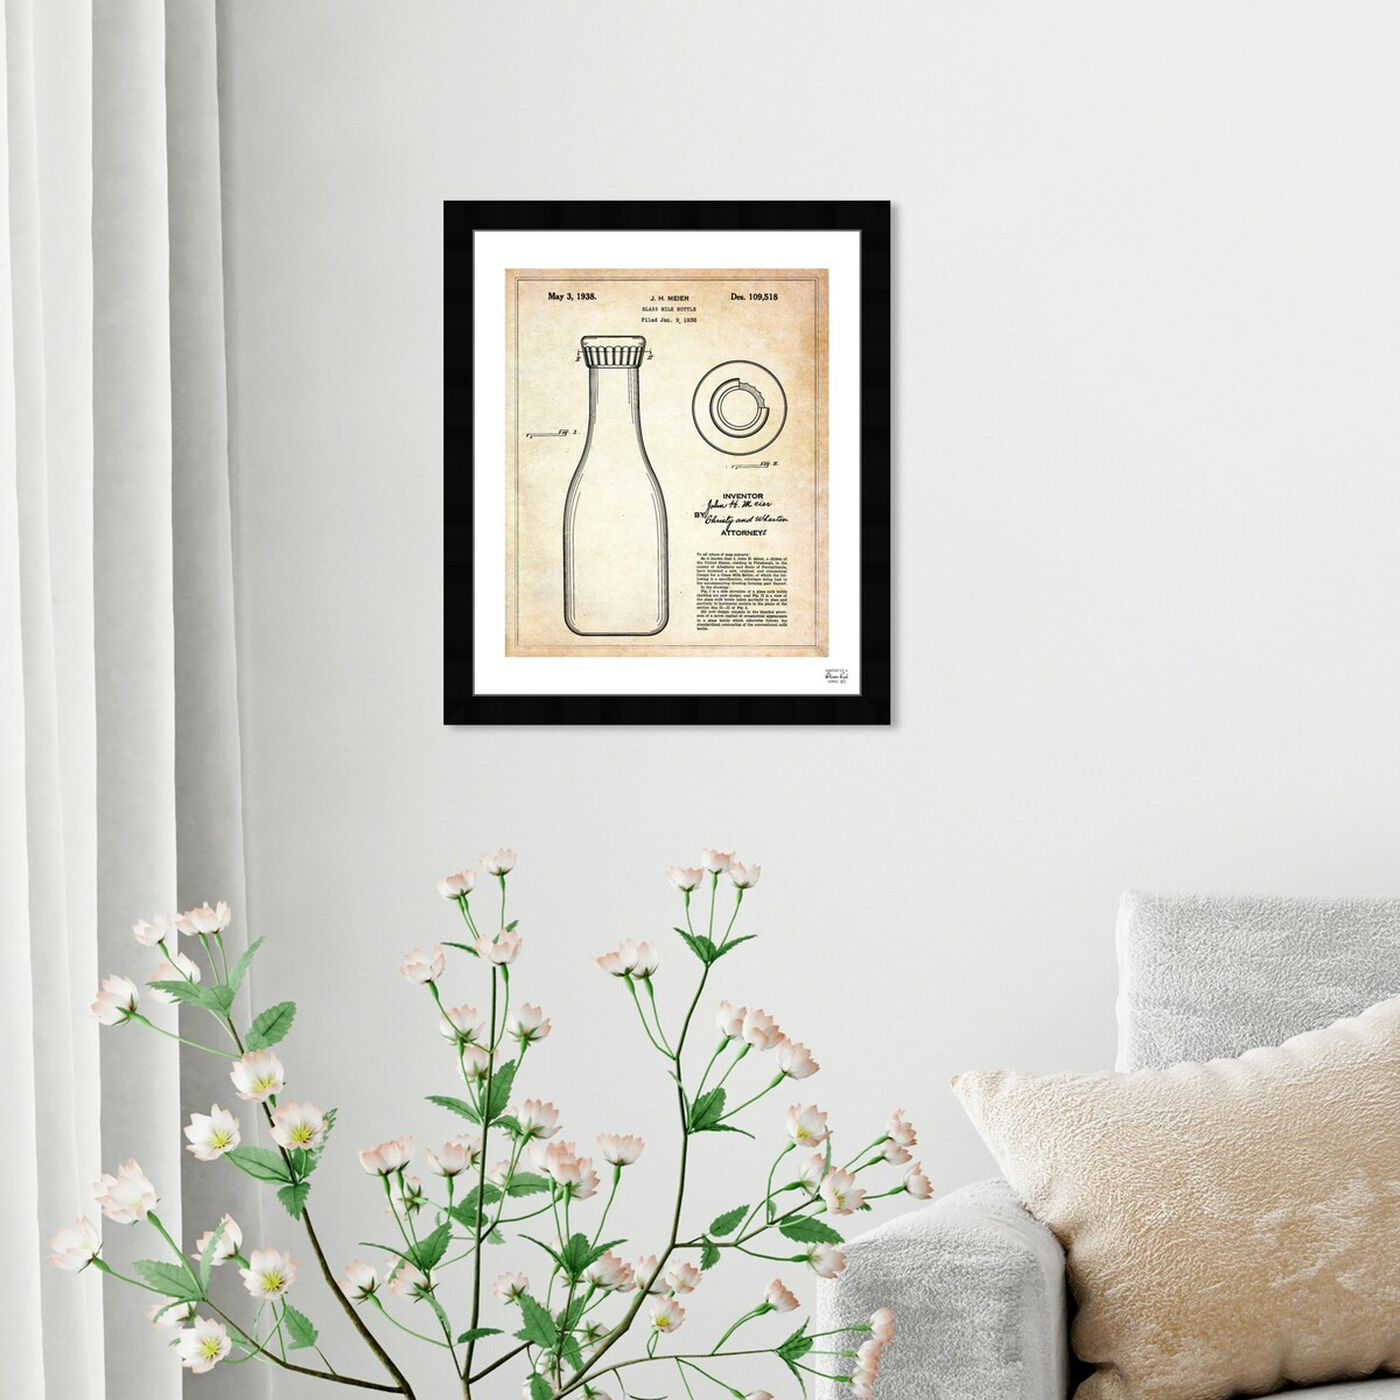 Hanging view of Milk Bottle 1938 featuring food and cuisine and baking essentials art.